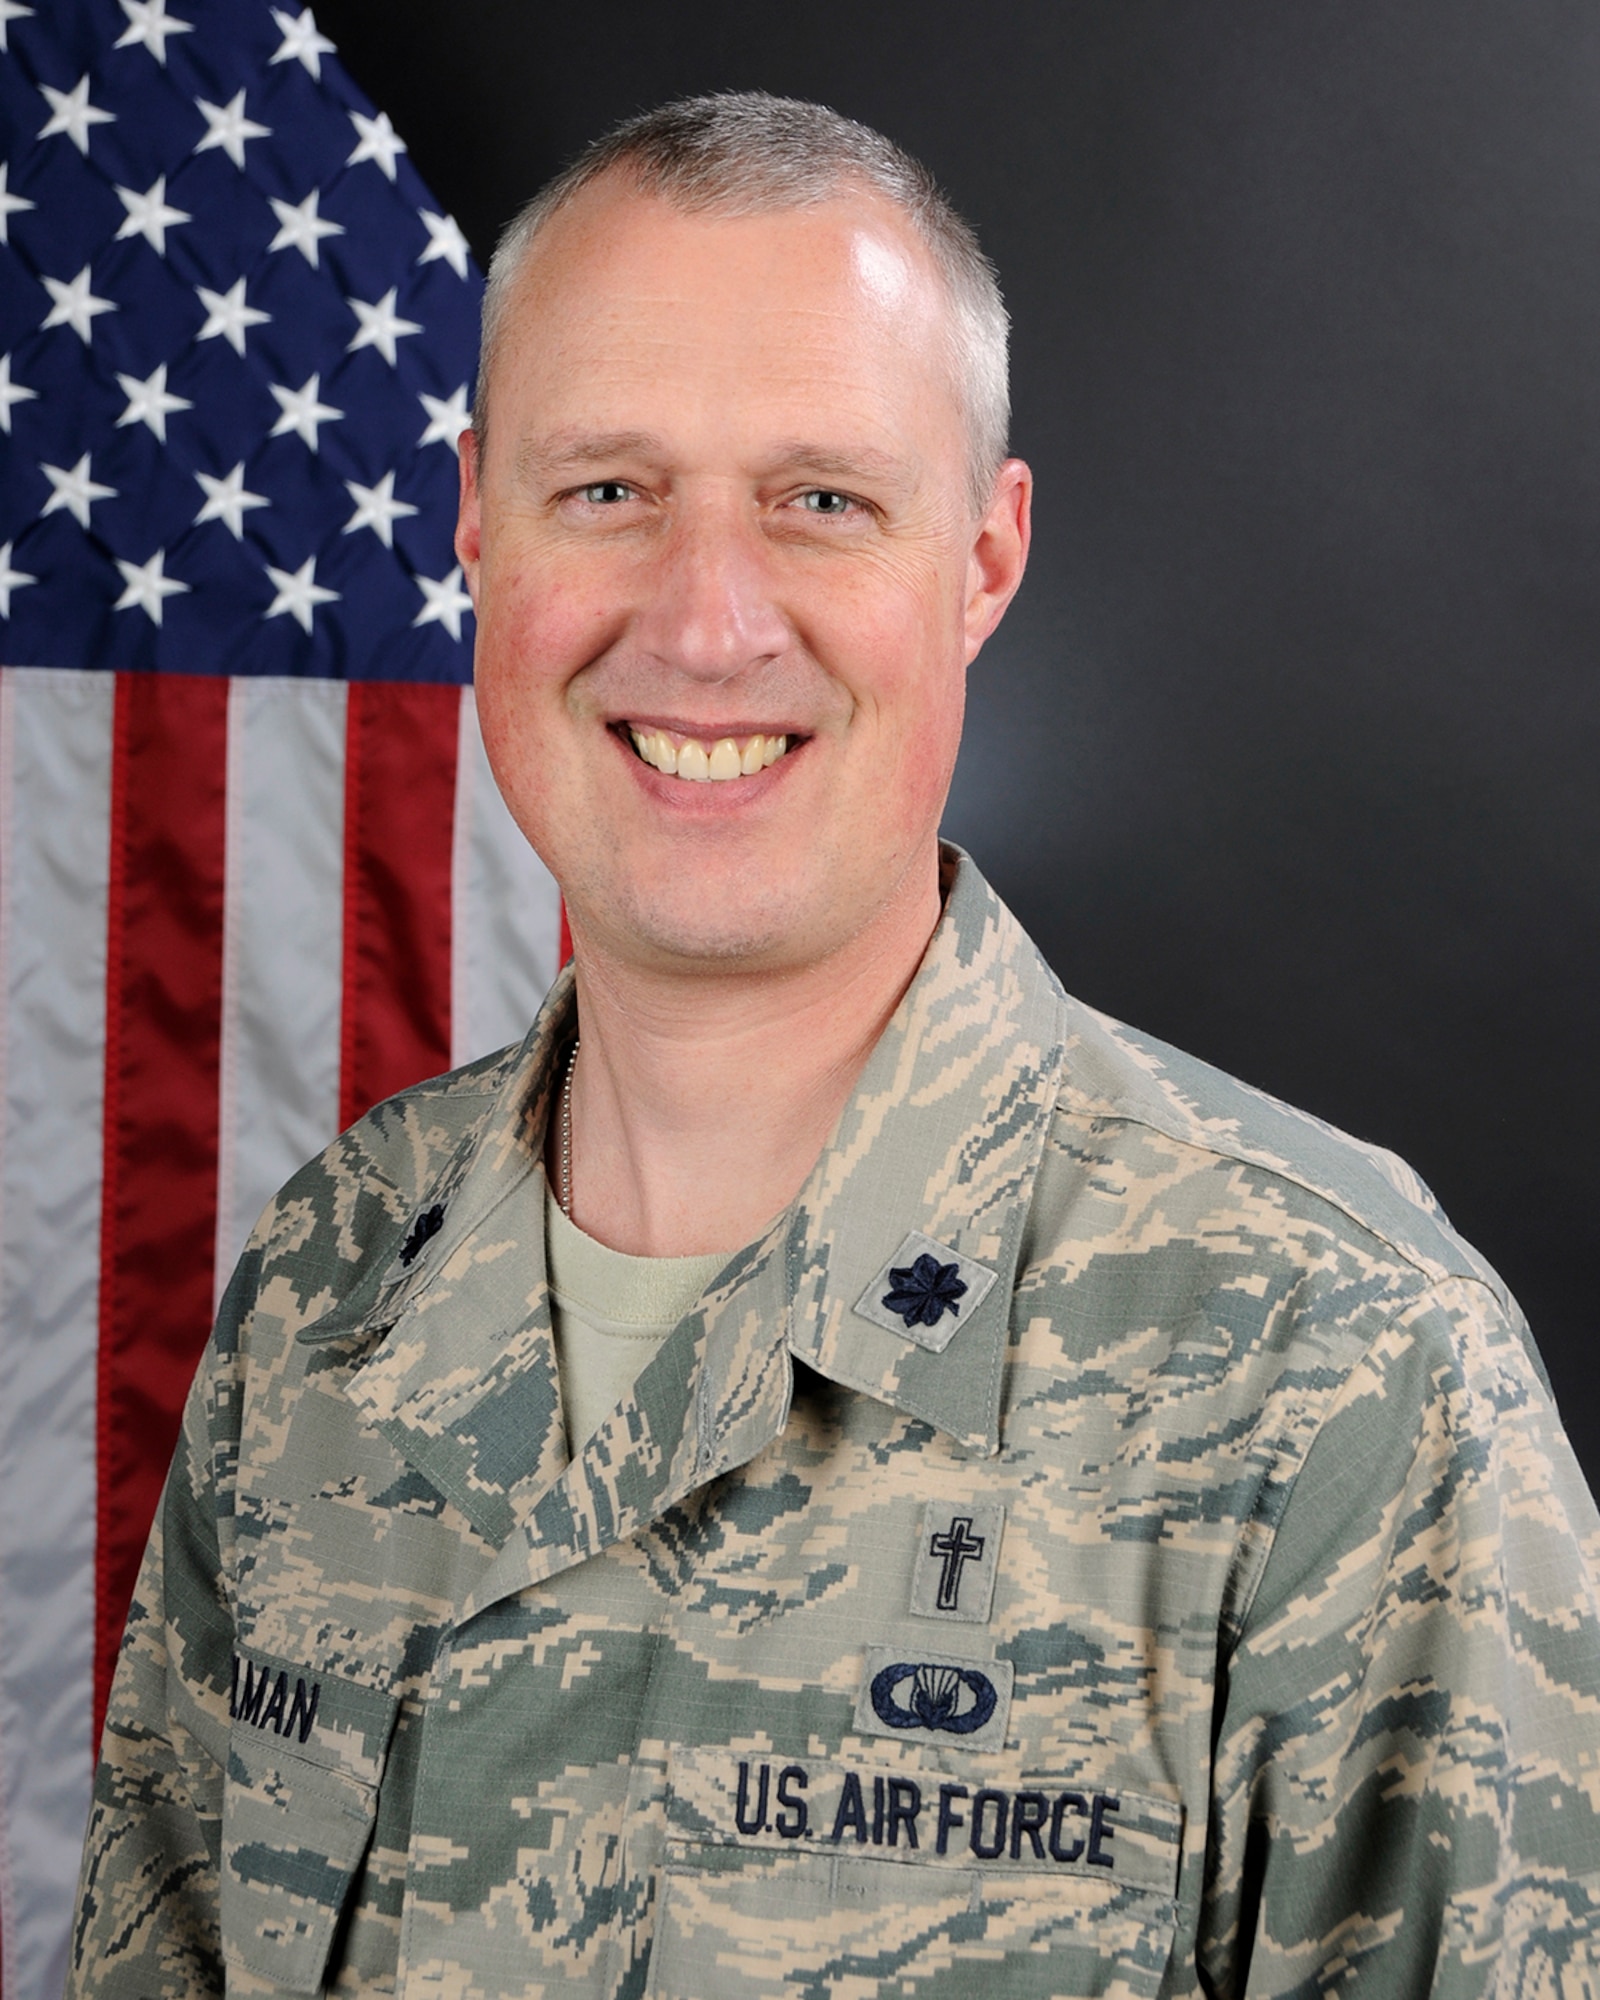 U.S. Air Force portrait of Lt. Col. Brian Bohlman, a chaplain assigned to the 169th Fighter Wing, April 27, 2016. (U.S. Air National Guard photo by Airman 1st Class Megan Floyd)